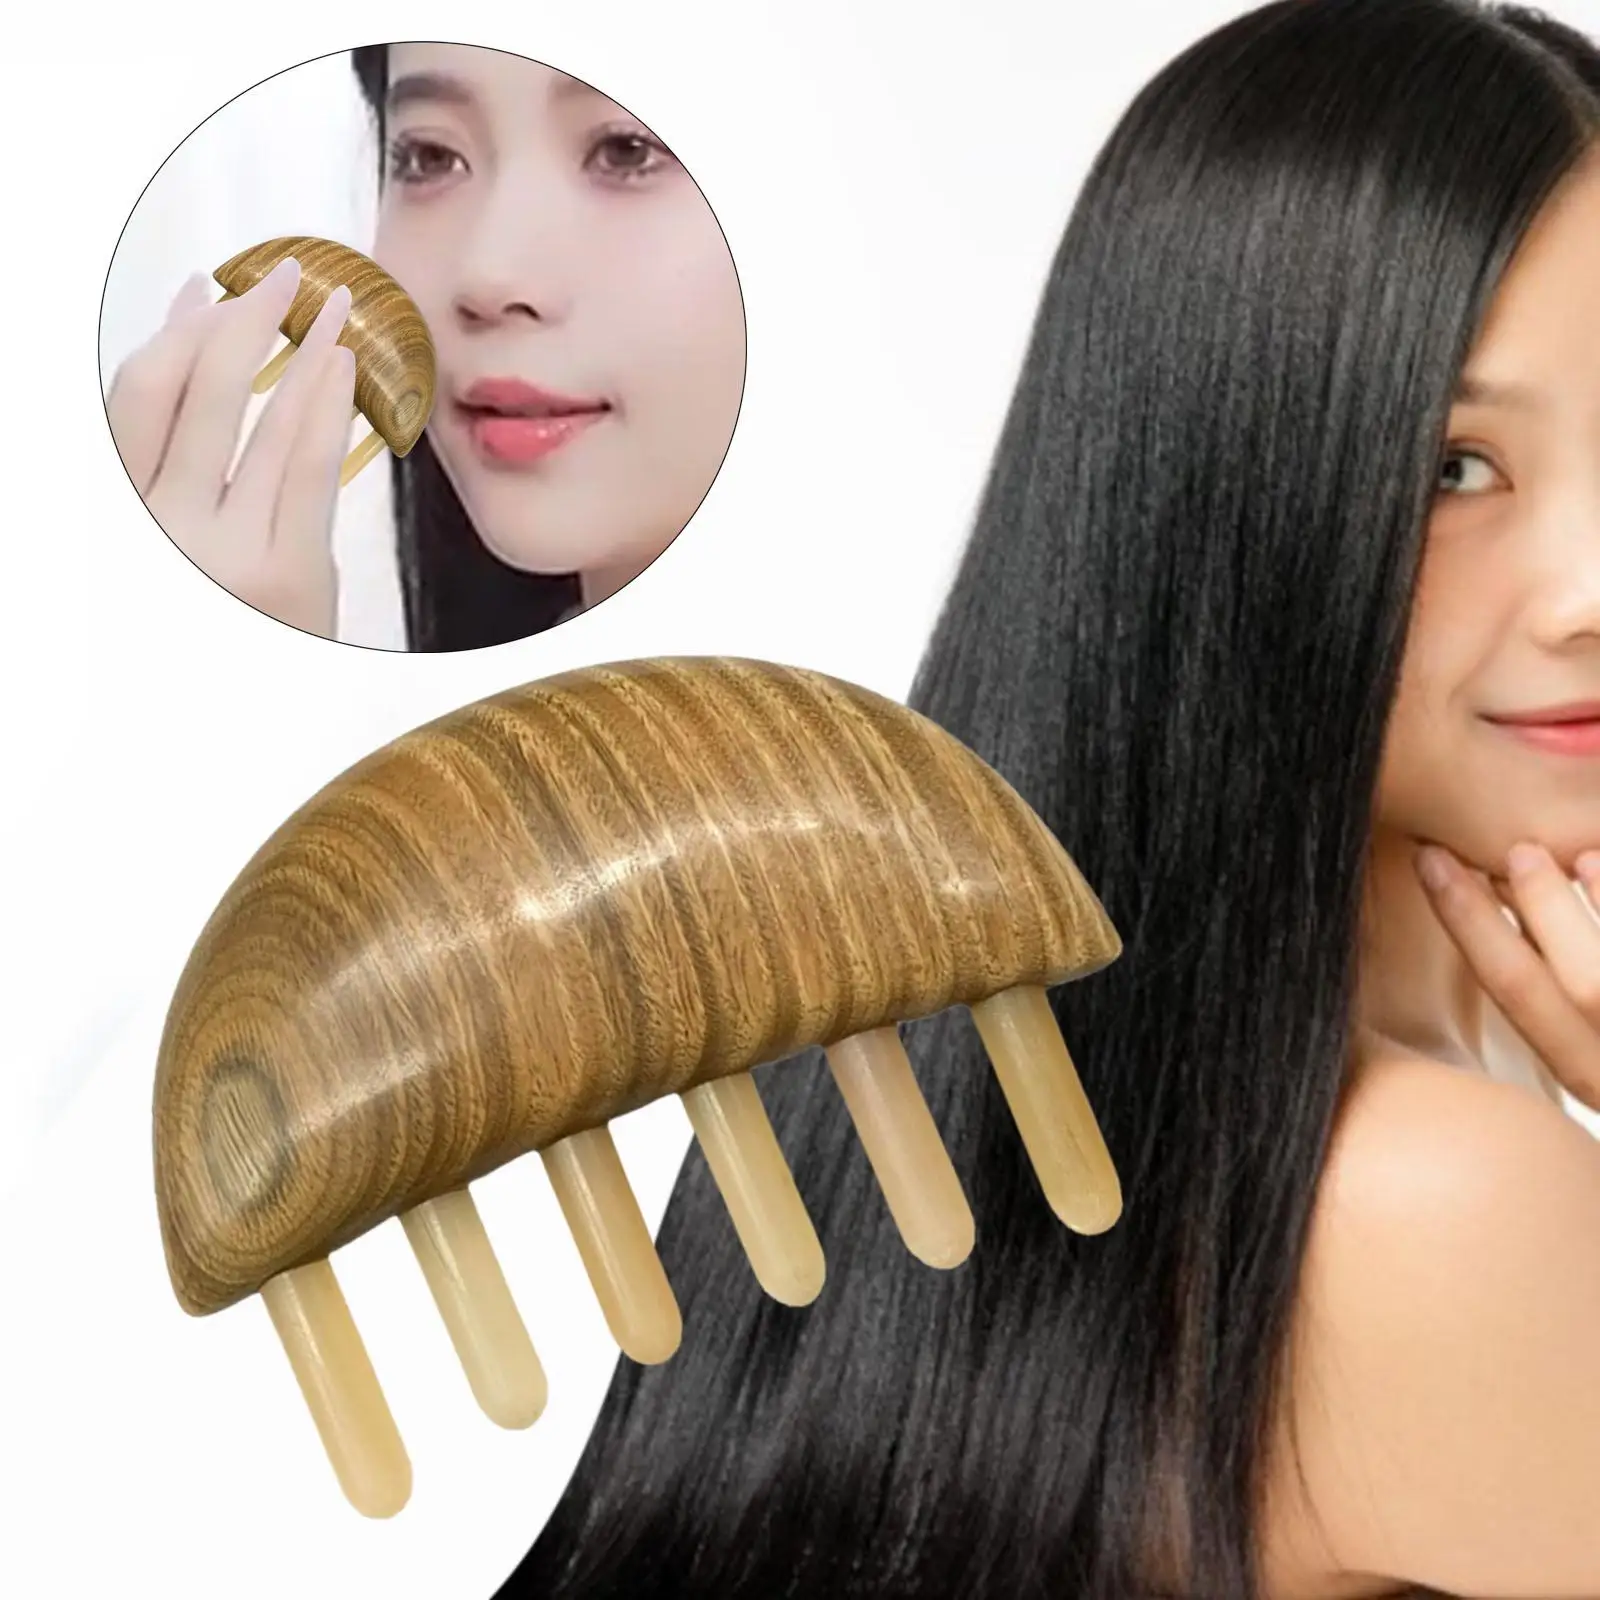 Green Sandalwood Large Teeth Hair Comb with Massage Back 10.5x7.5x2.5cm Portable